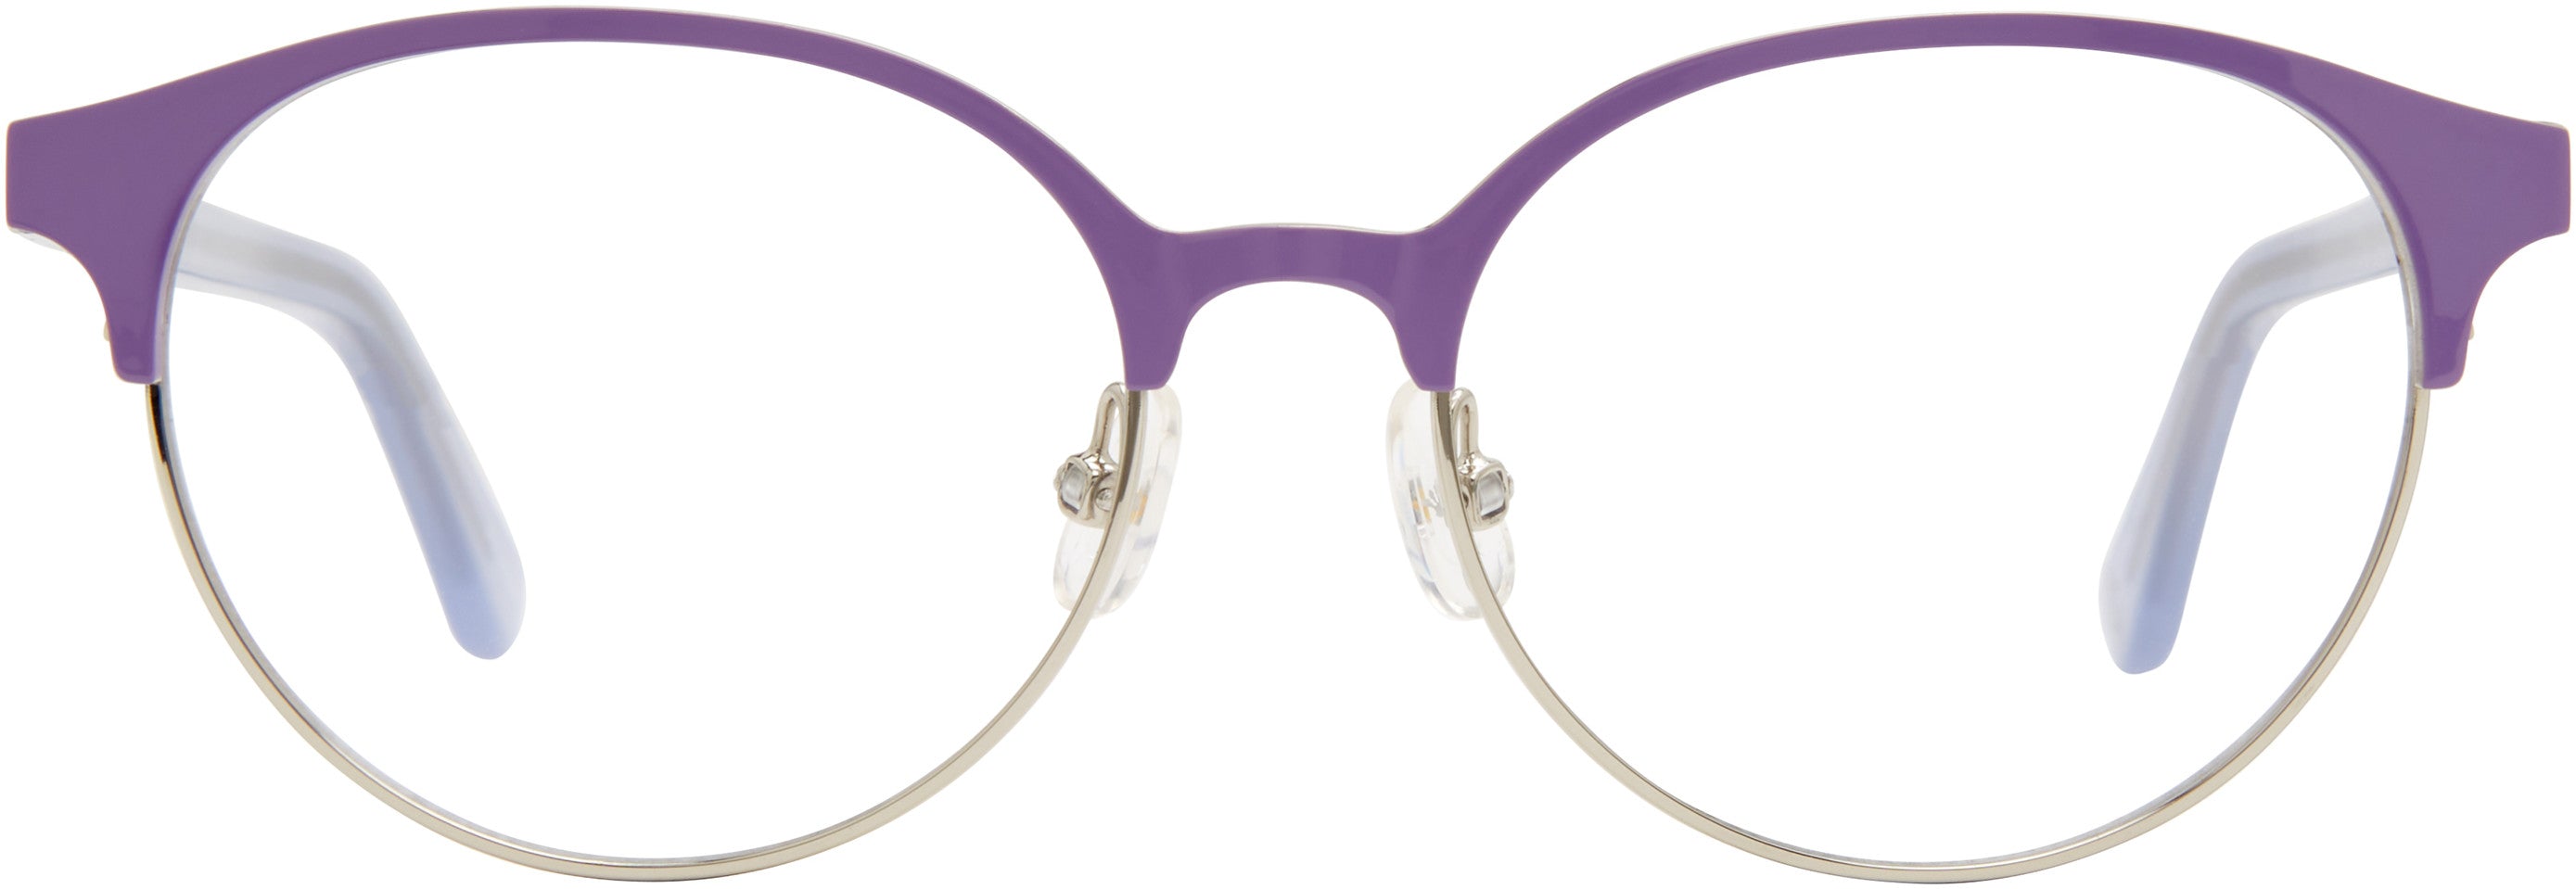 Juicy Couture Juicy 945 Oval Modified Eyeglasses 0789-0789  Lilac (00 Demo Lens)